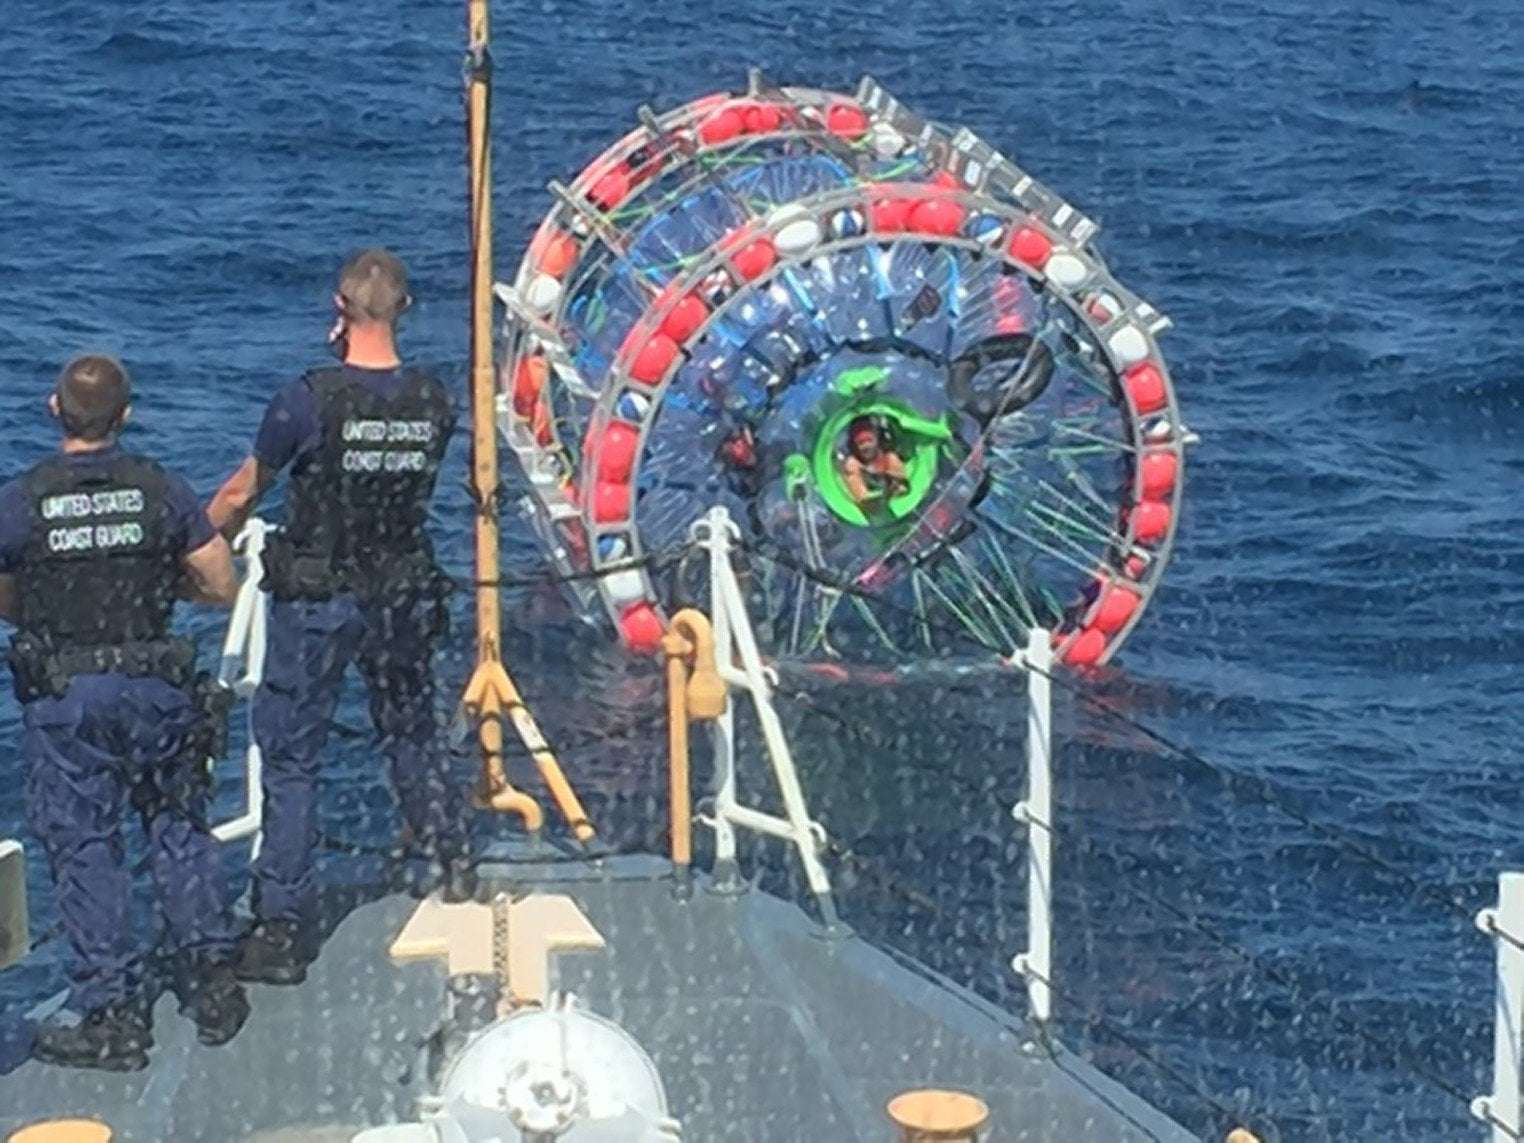 image for Florida Extreme Athlete's Transatlantic Hamster-Wheel Expedition Thwarted by Coast Guard